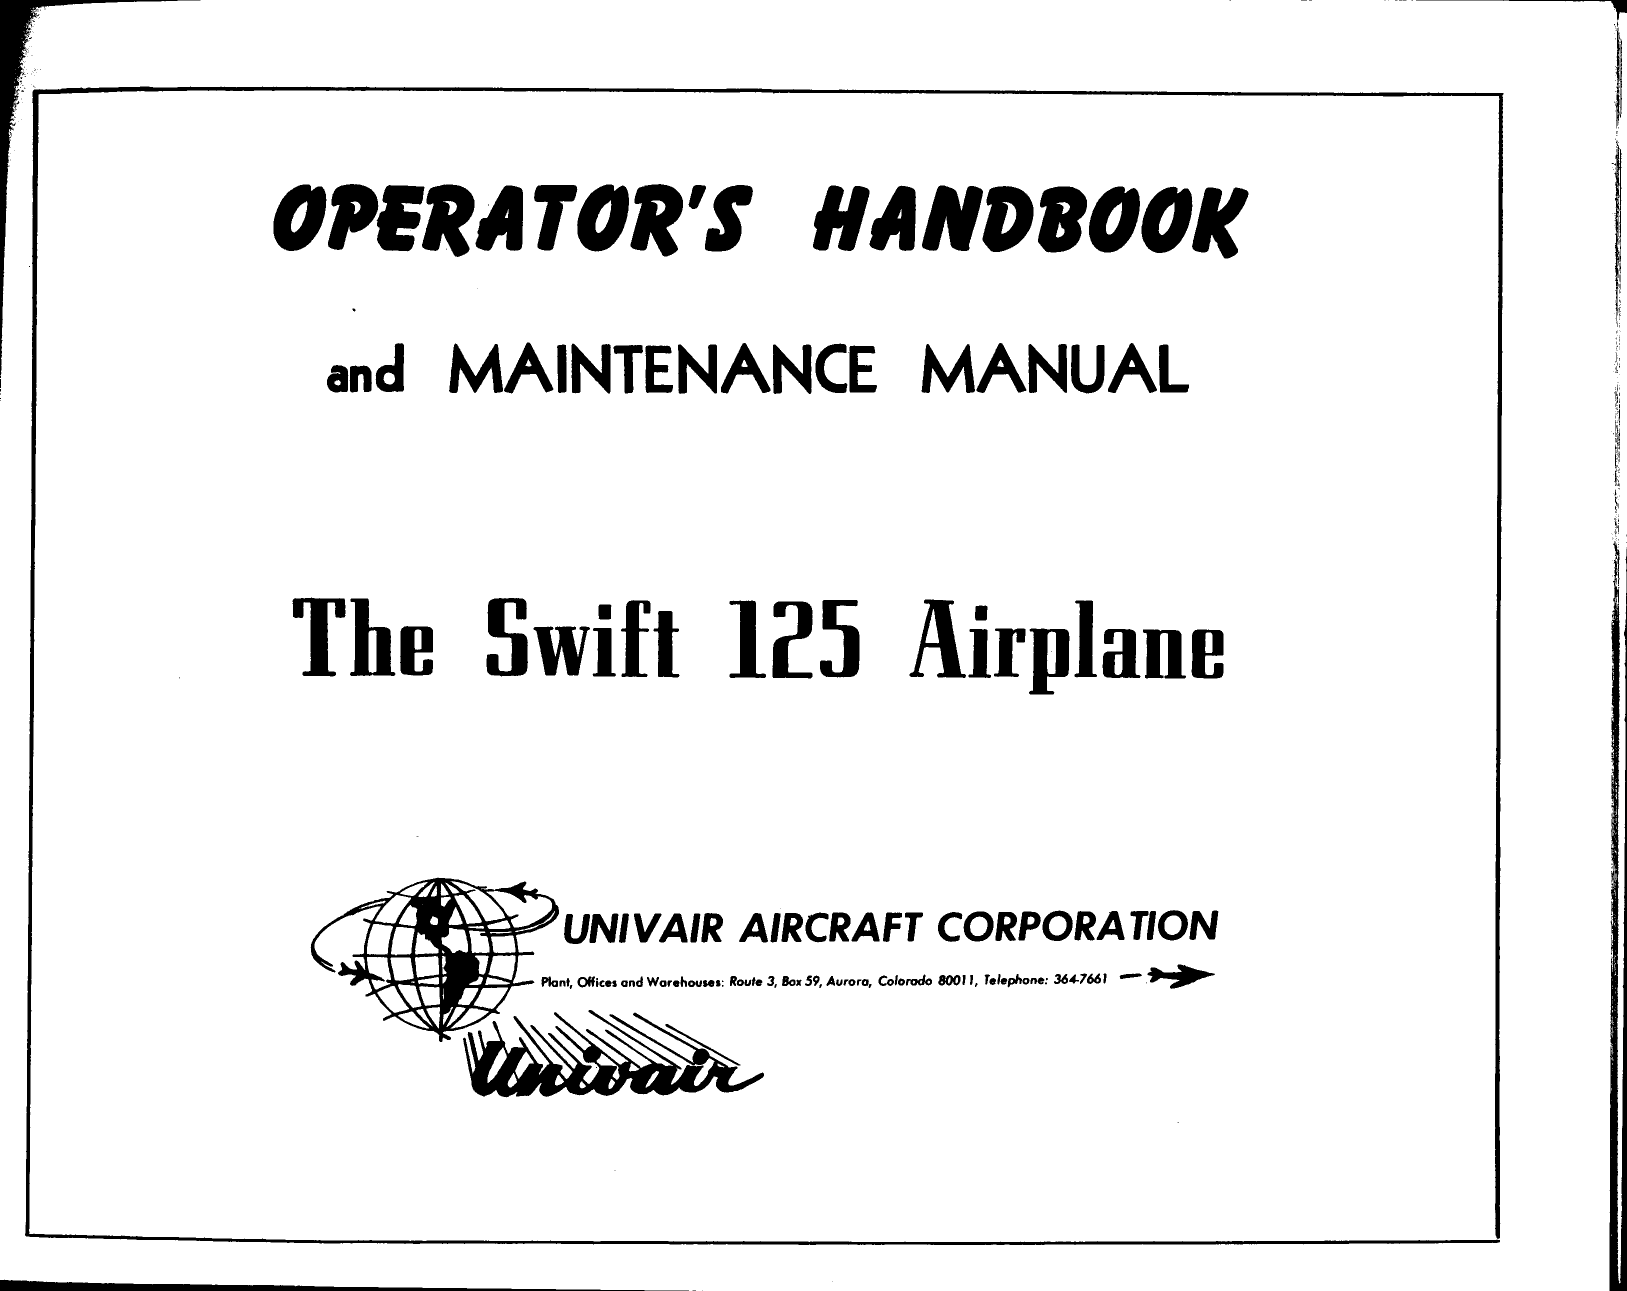 Sample page 3 from AirCorps Library document: Operator's Handbook & Maintenance Manual for the Swift 125 Airplane